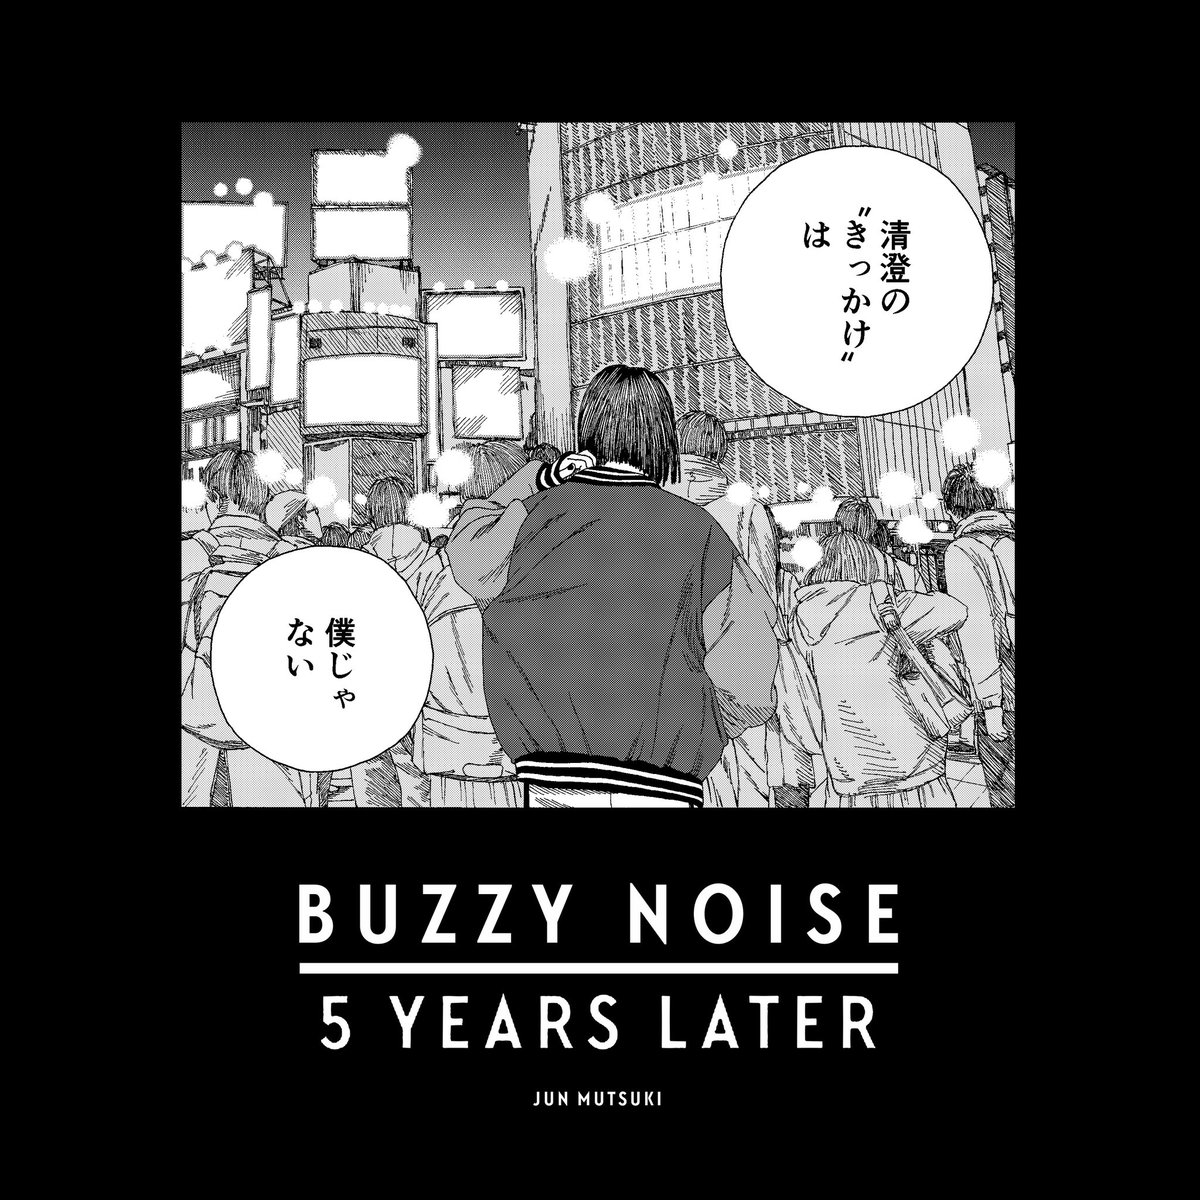 『BUZZY NOISE 5 YEARS LATER』
掲載号販売終了後もビッコミで読めるそうなので是非 